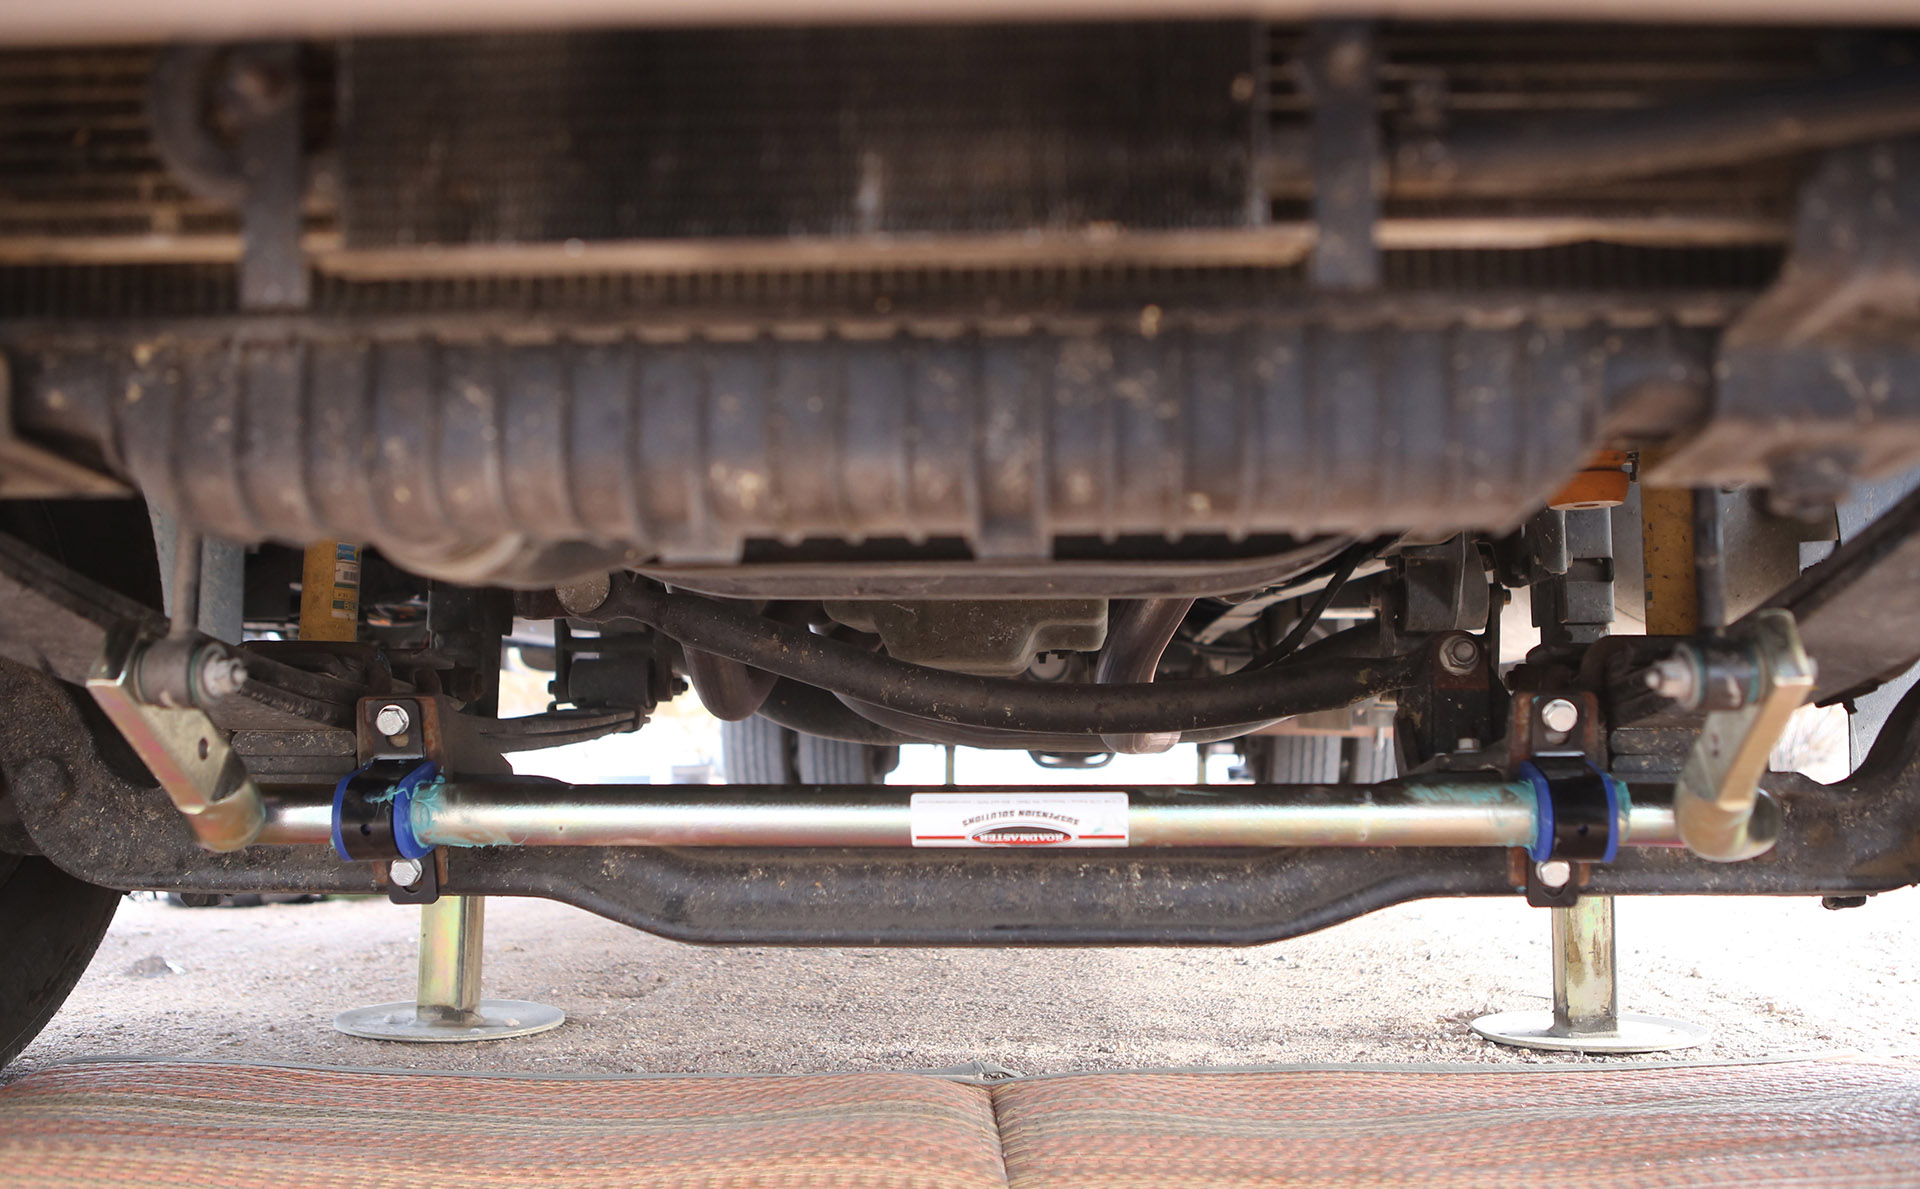 The front Anti-Sway Bar installed.